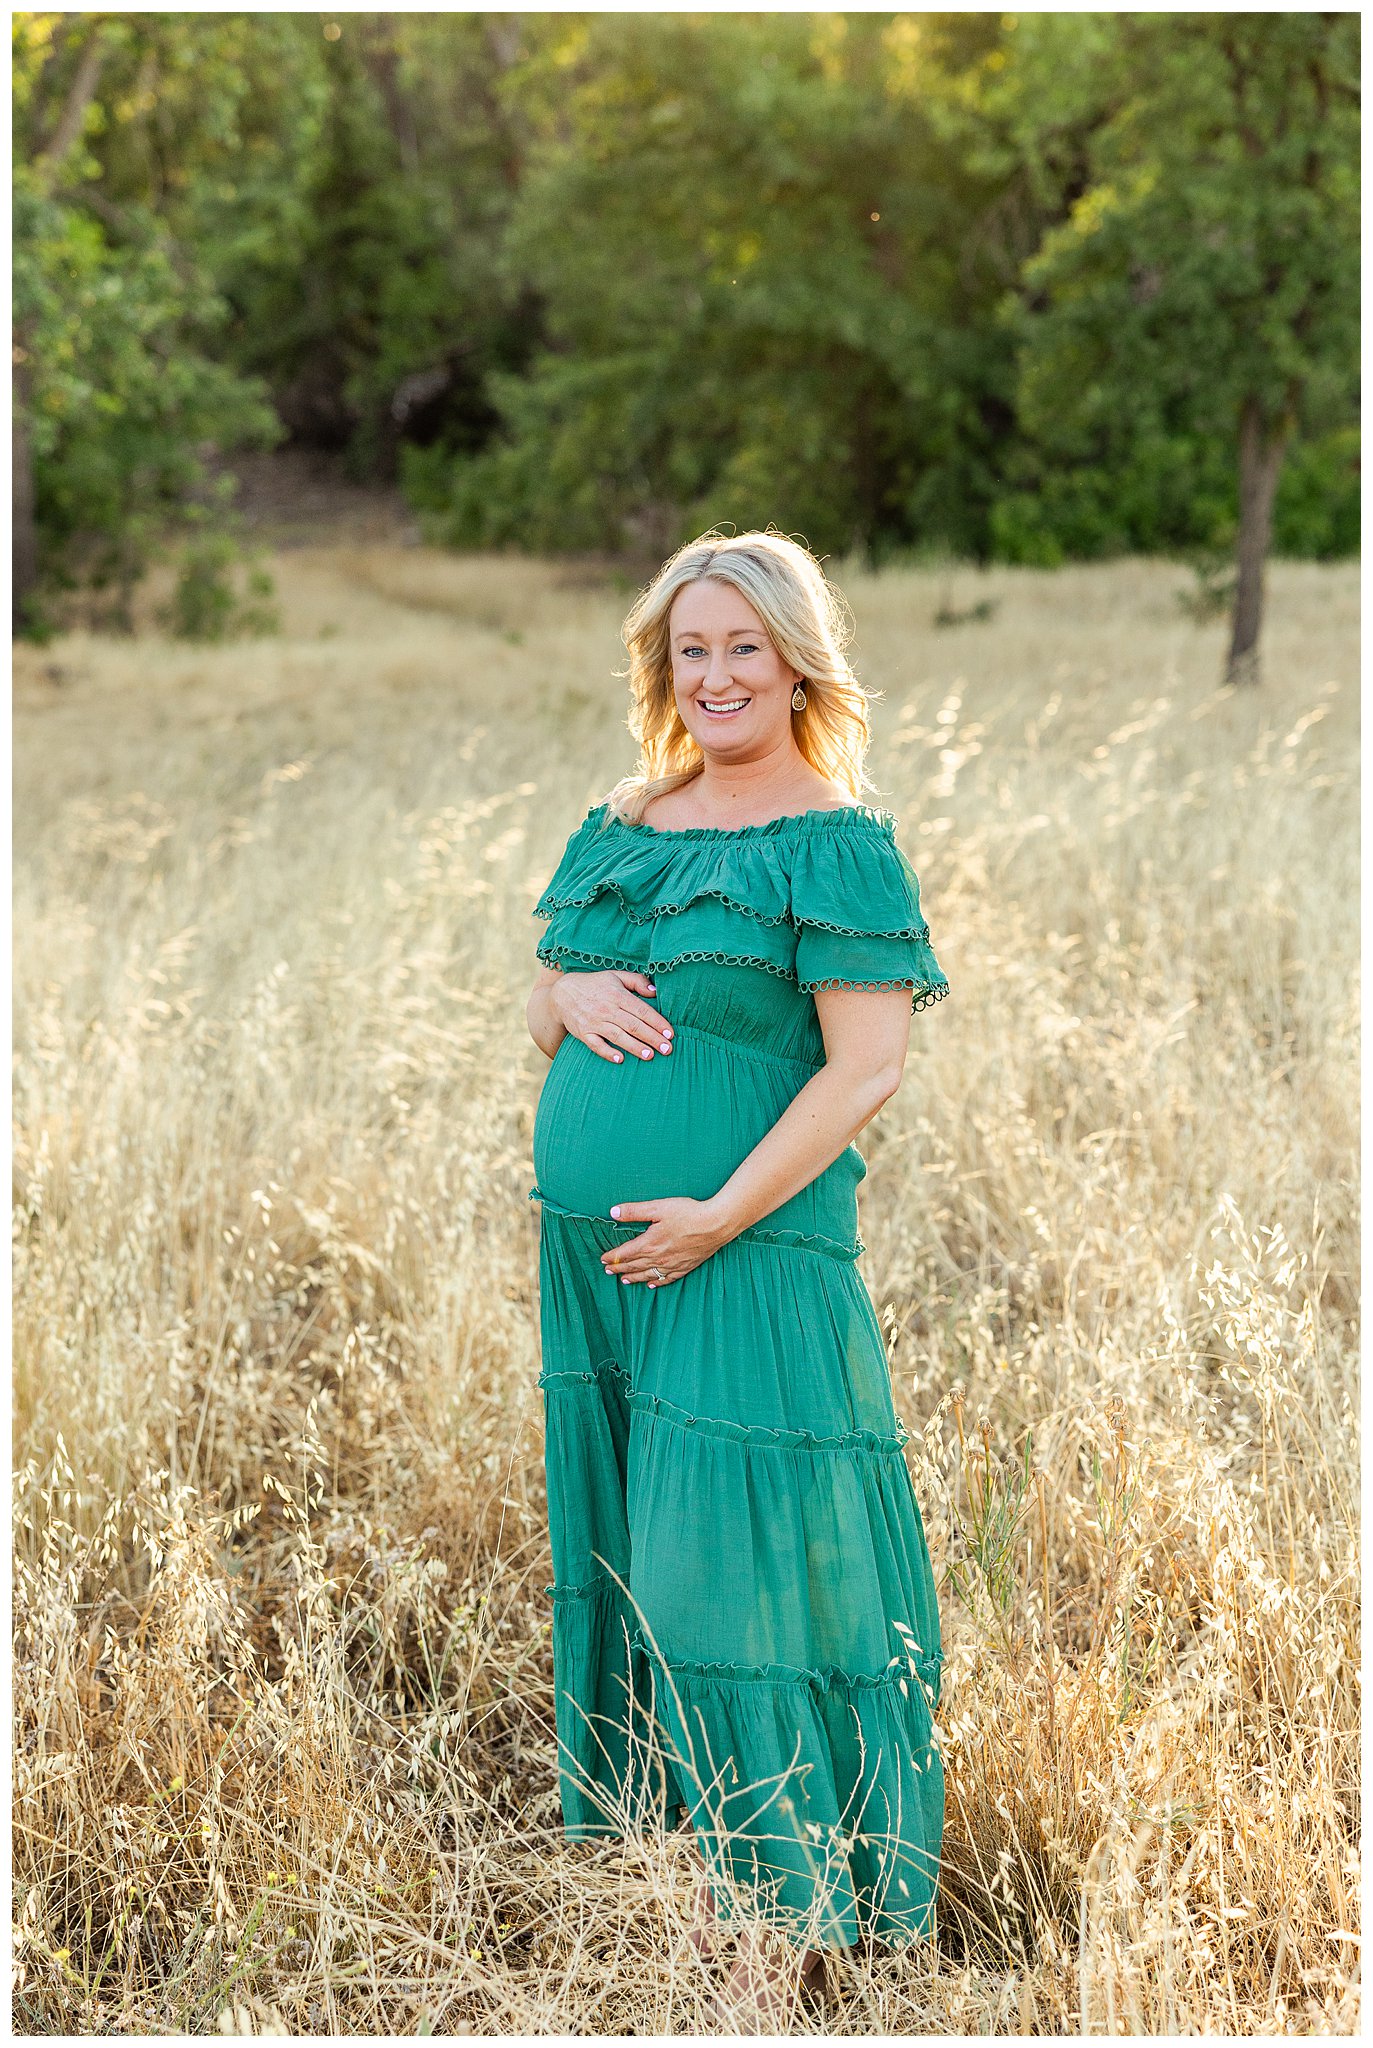 Summer Maternity Session in Grass Field in Green Dress | Jessica + Lucas